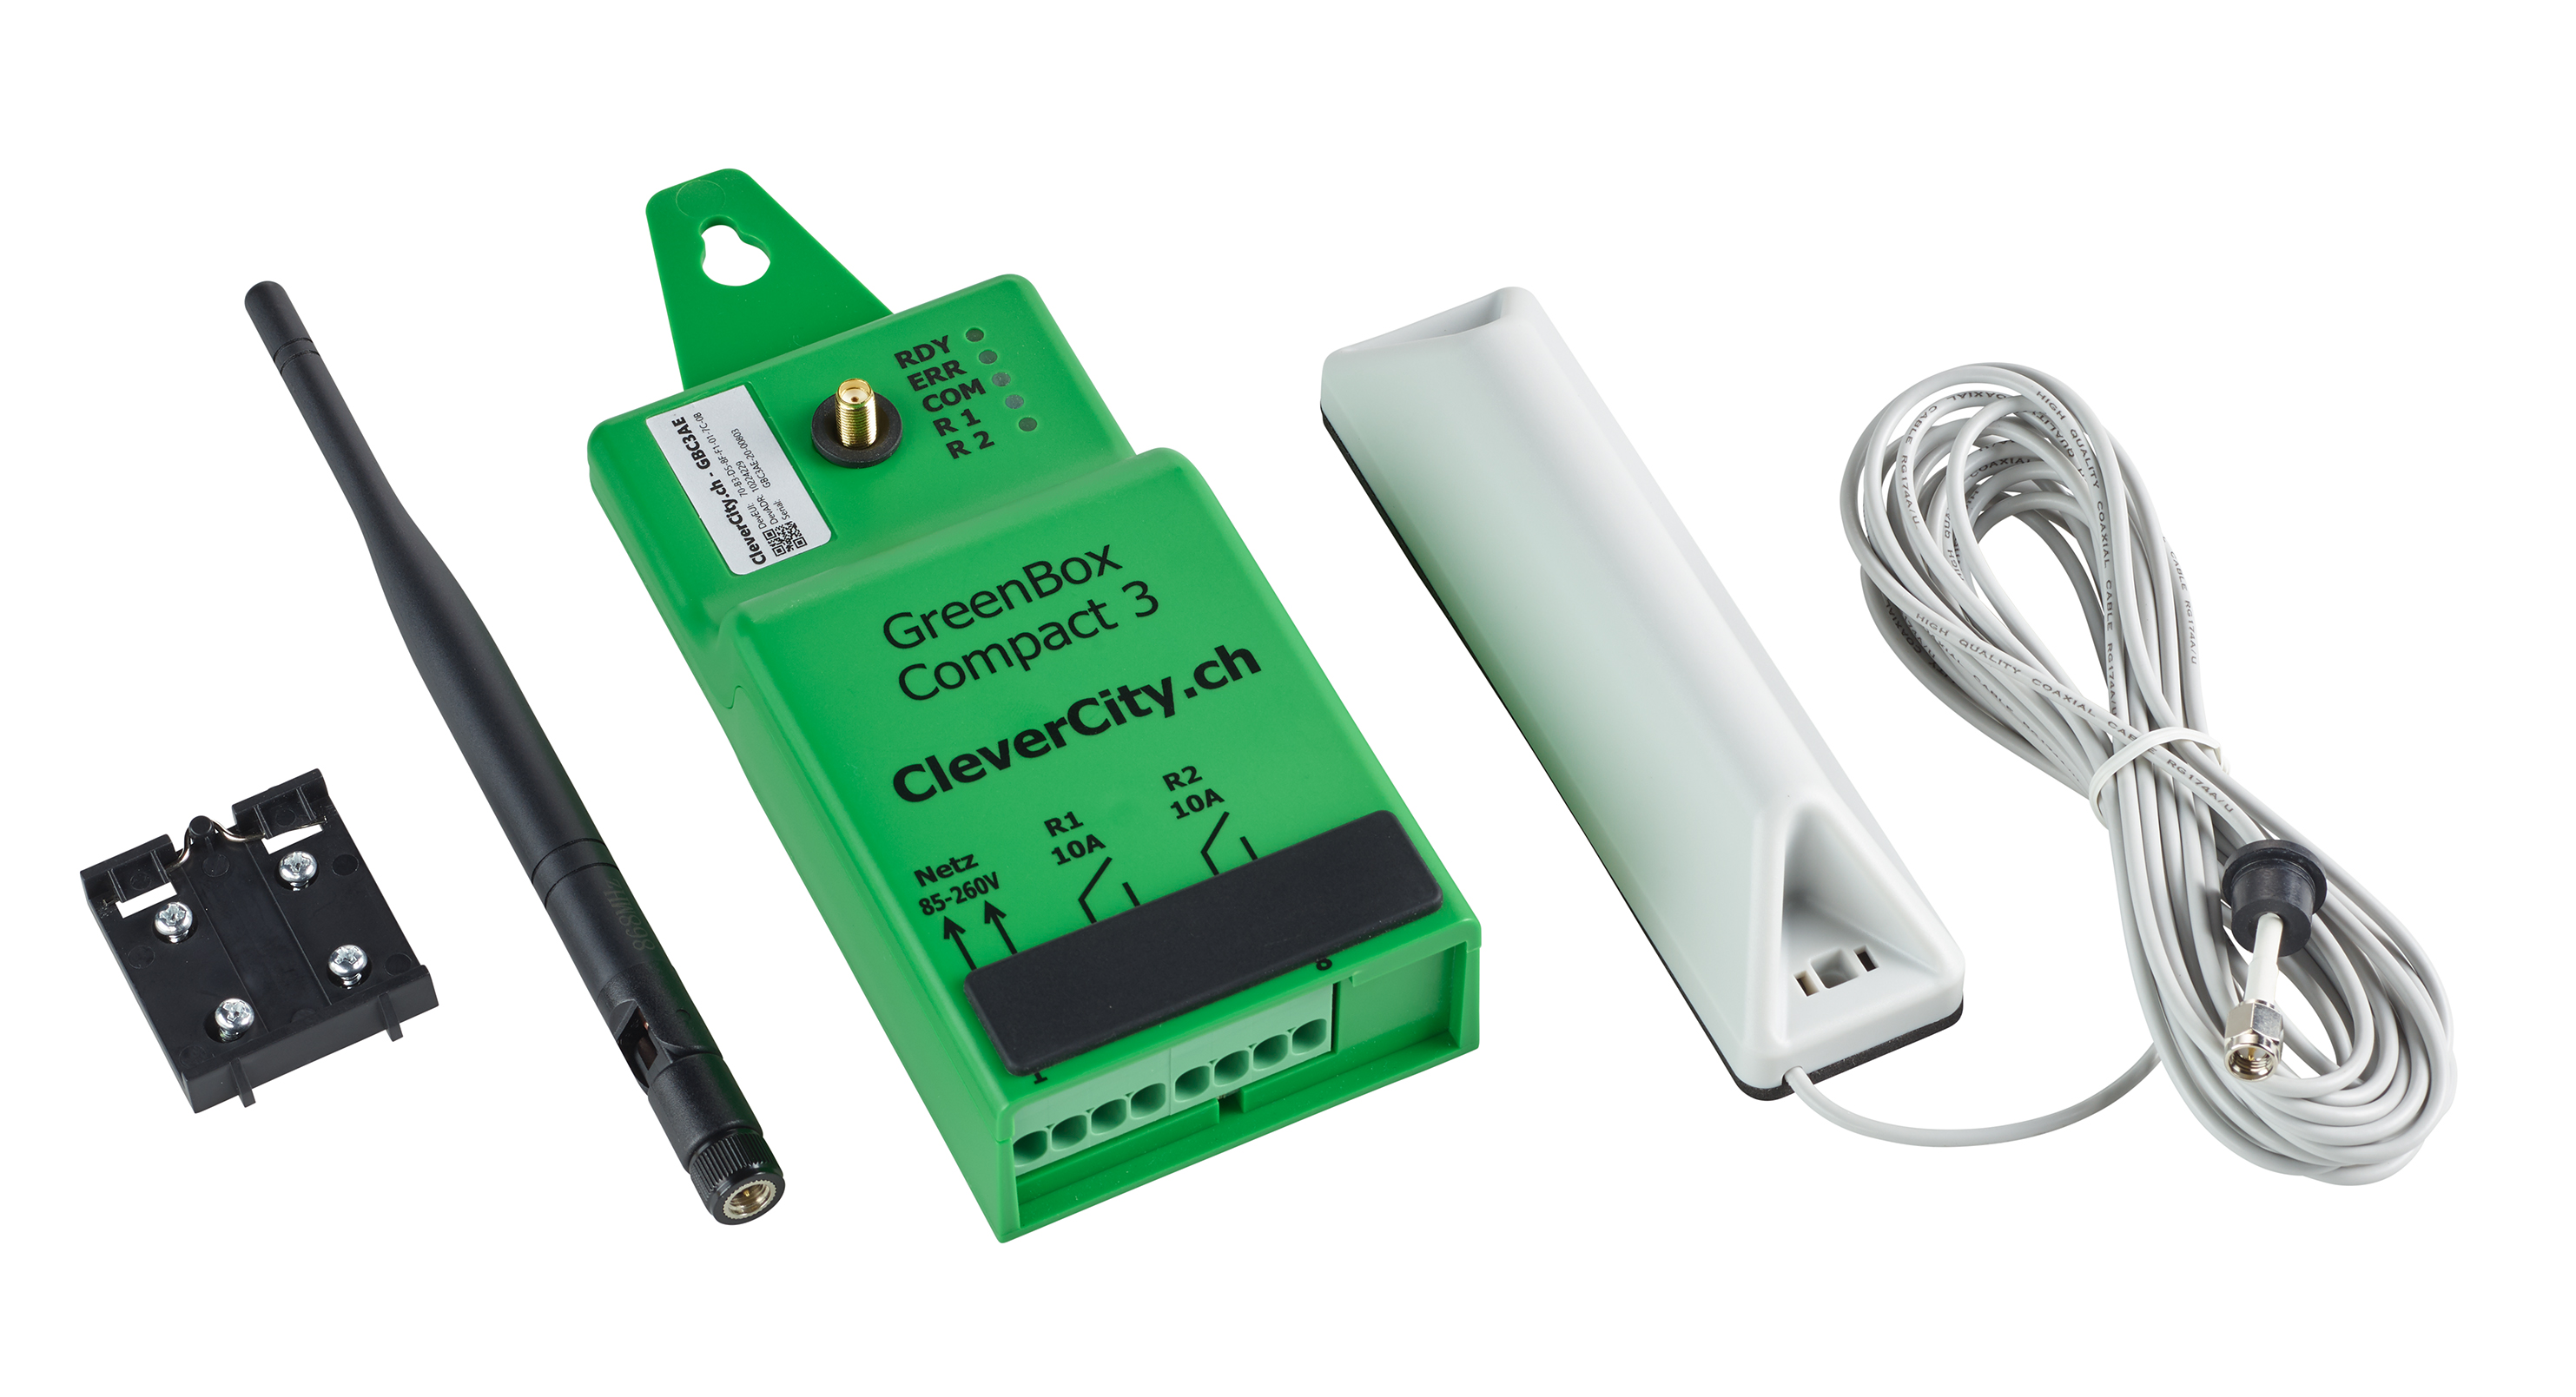 Available separately available accessories for CleverCity Greenbox Compact 3 (not included in standard delivery)